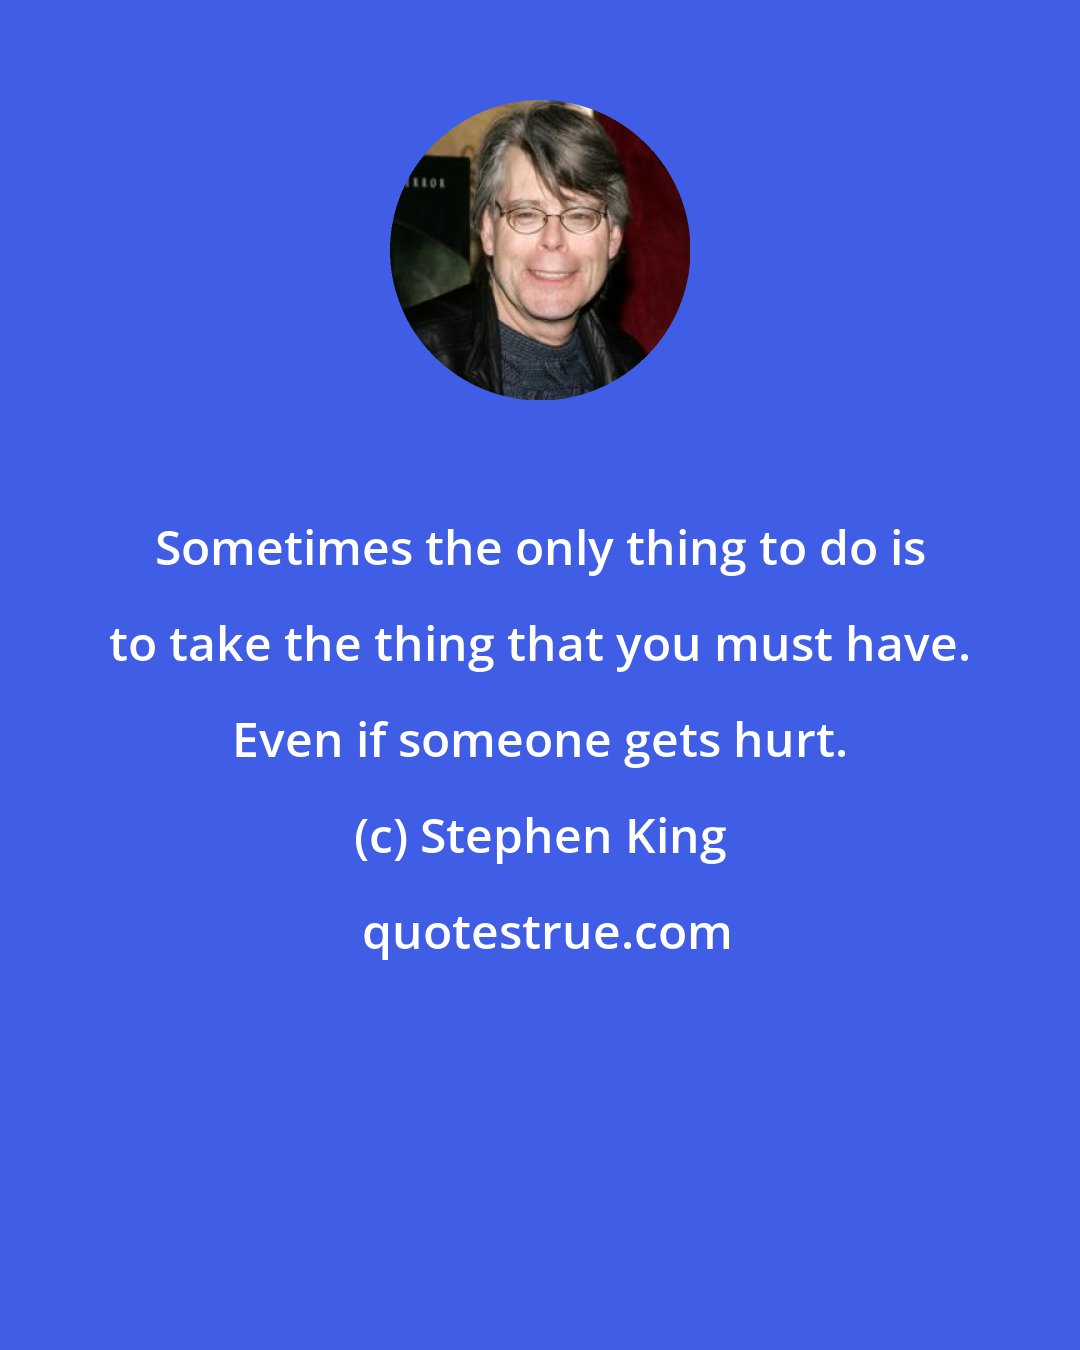 Stephen King: Sometimes the only thing to do is to take the thing that you must have. Even if someone gets hurt.